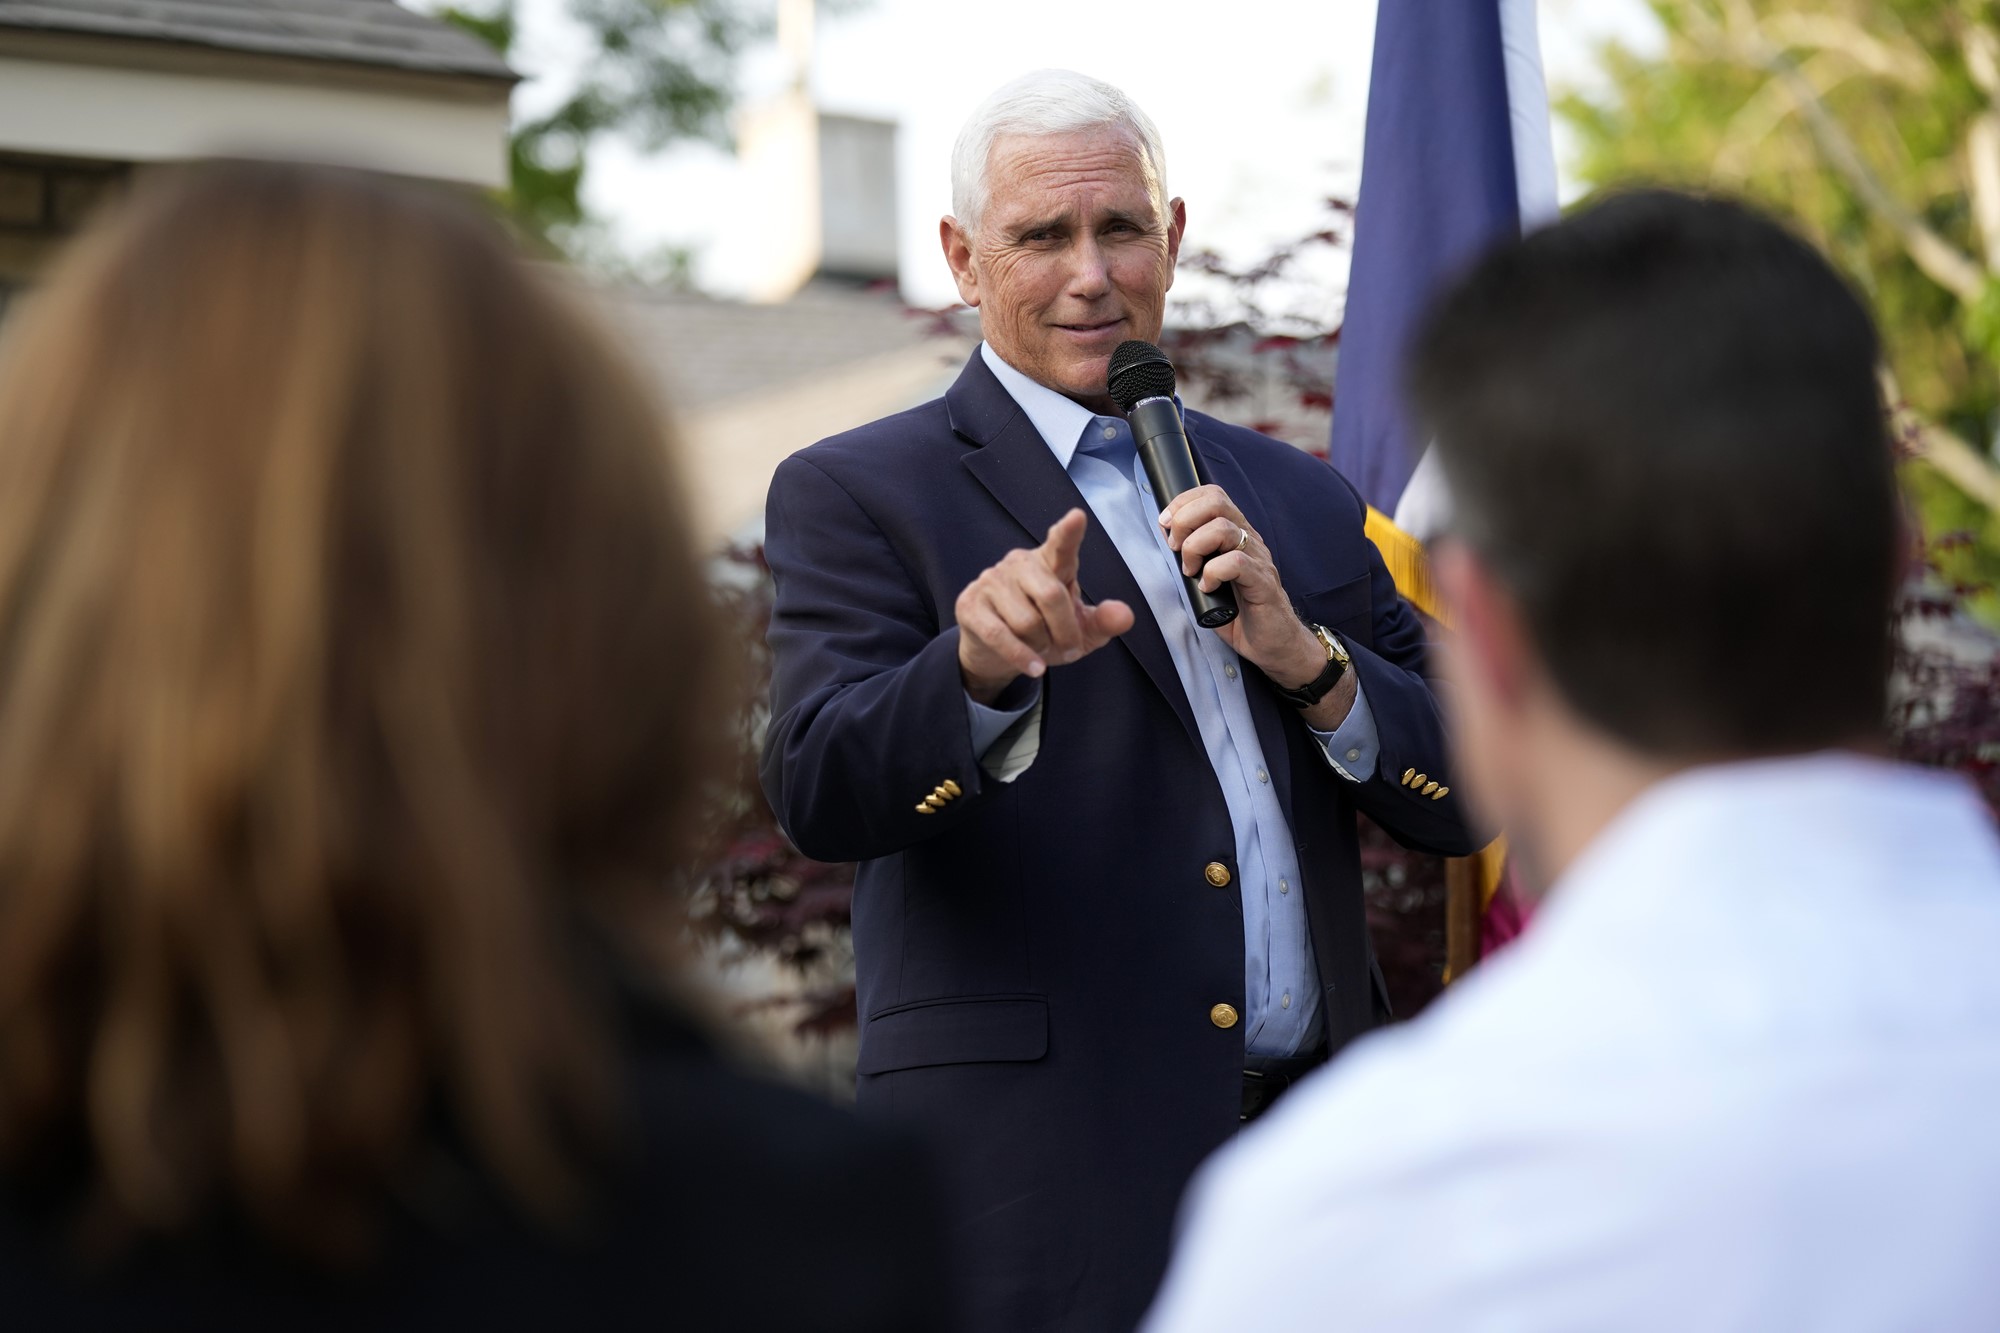 Former Vice President Mike Pence speaks into a microphone